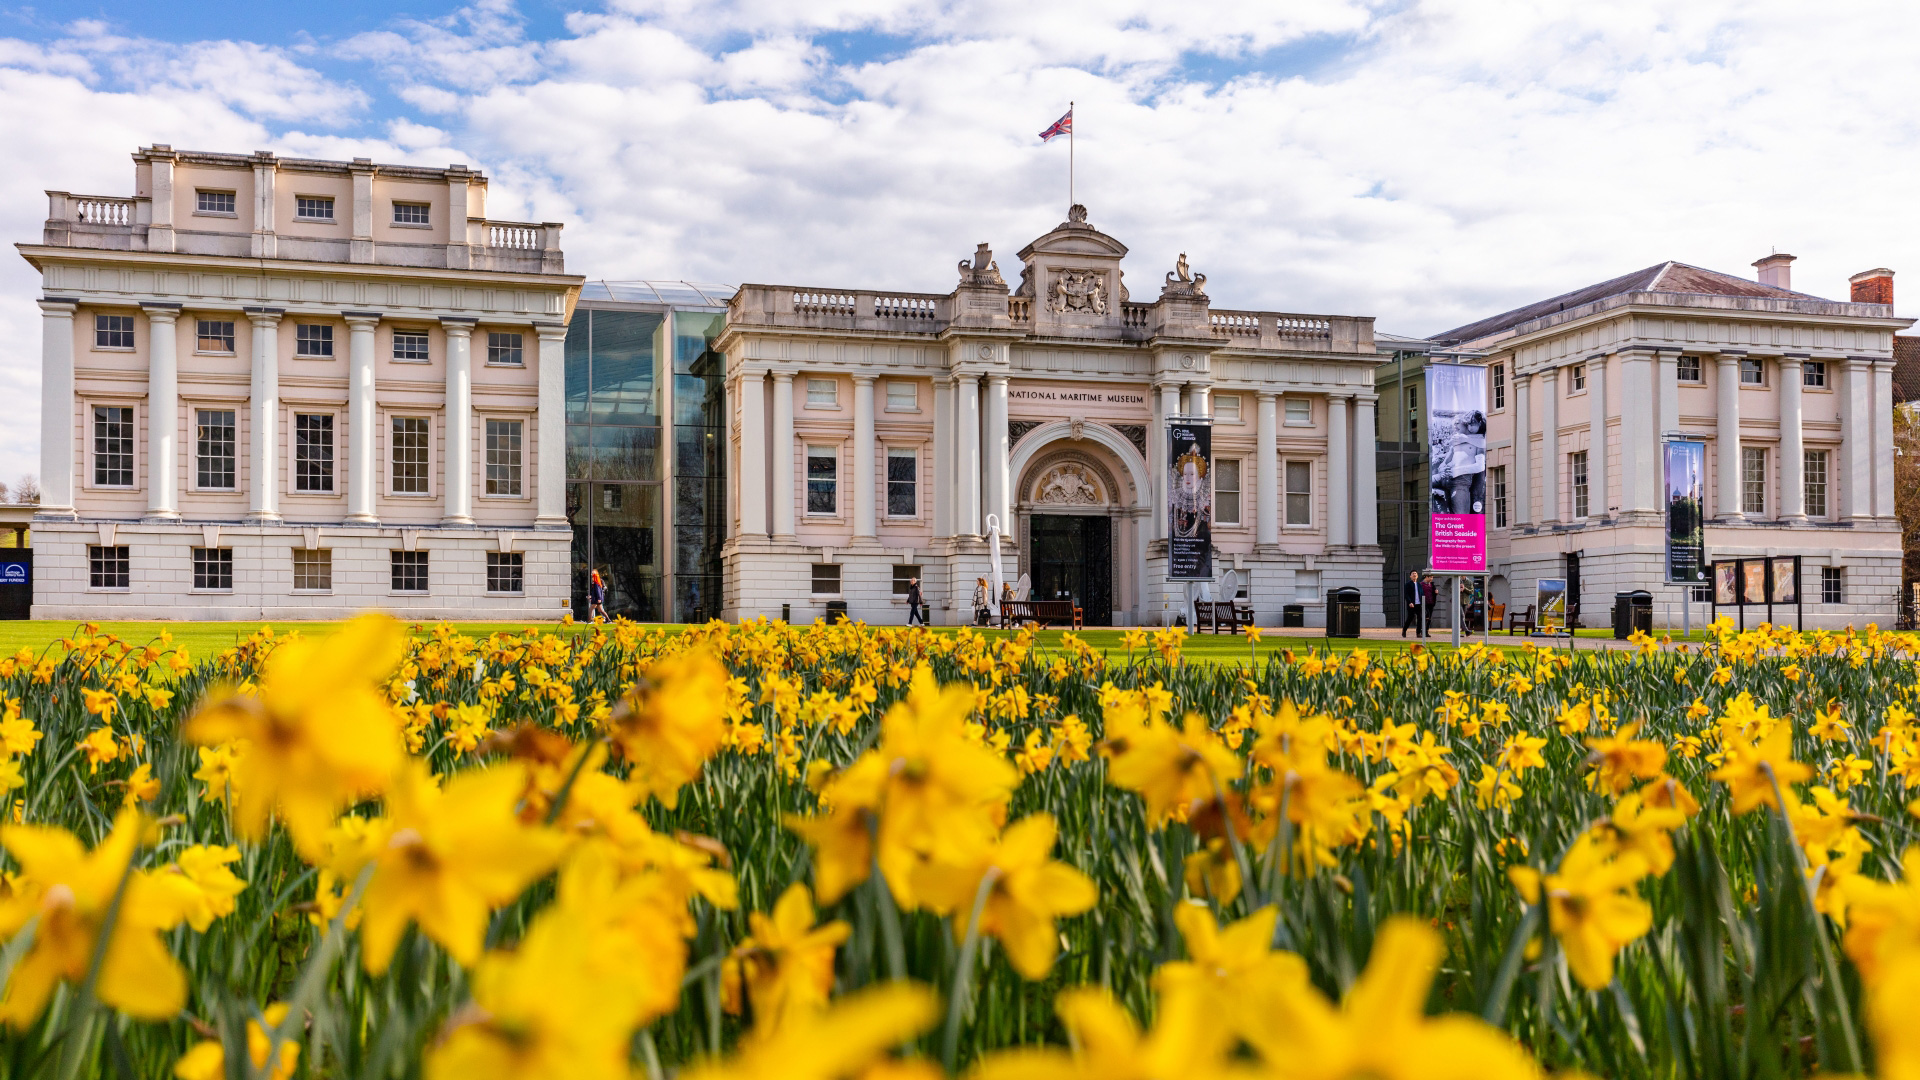 Daffodils bloom outside of the National Maritime Museum in Greenwich